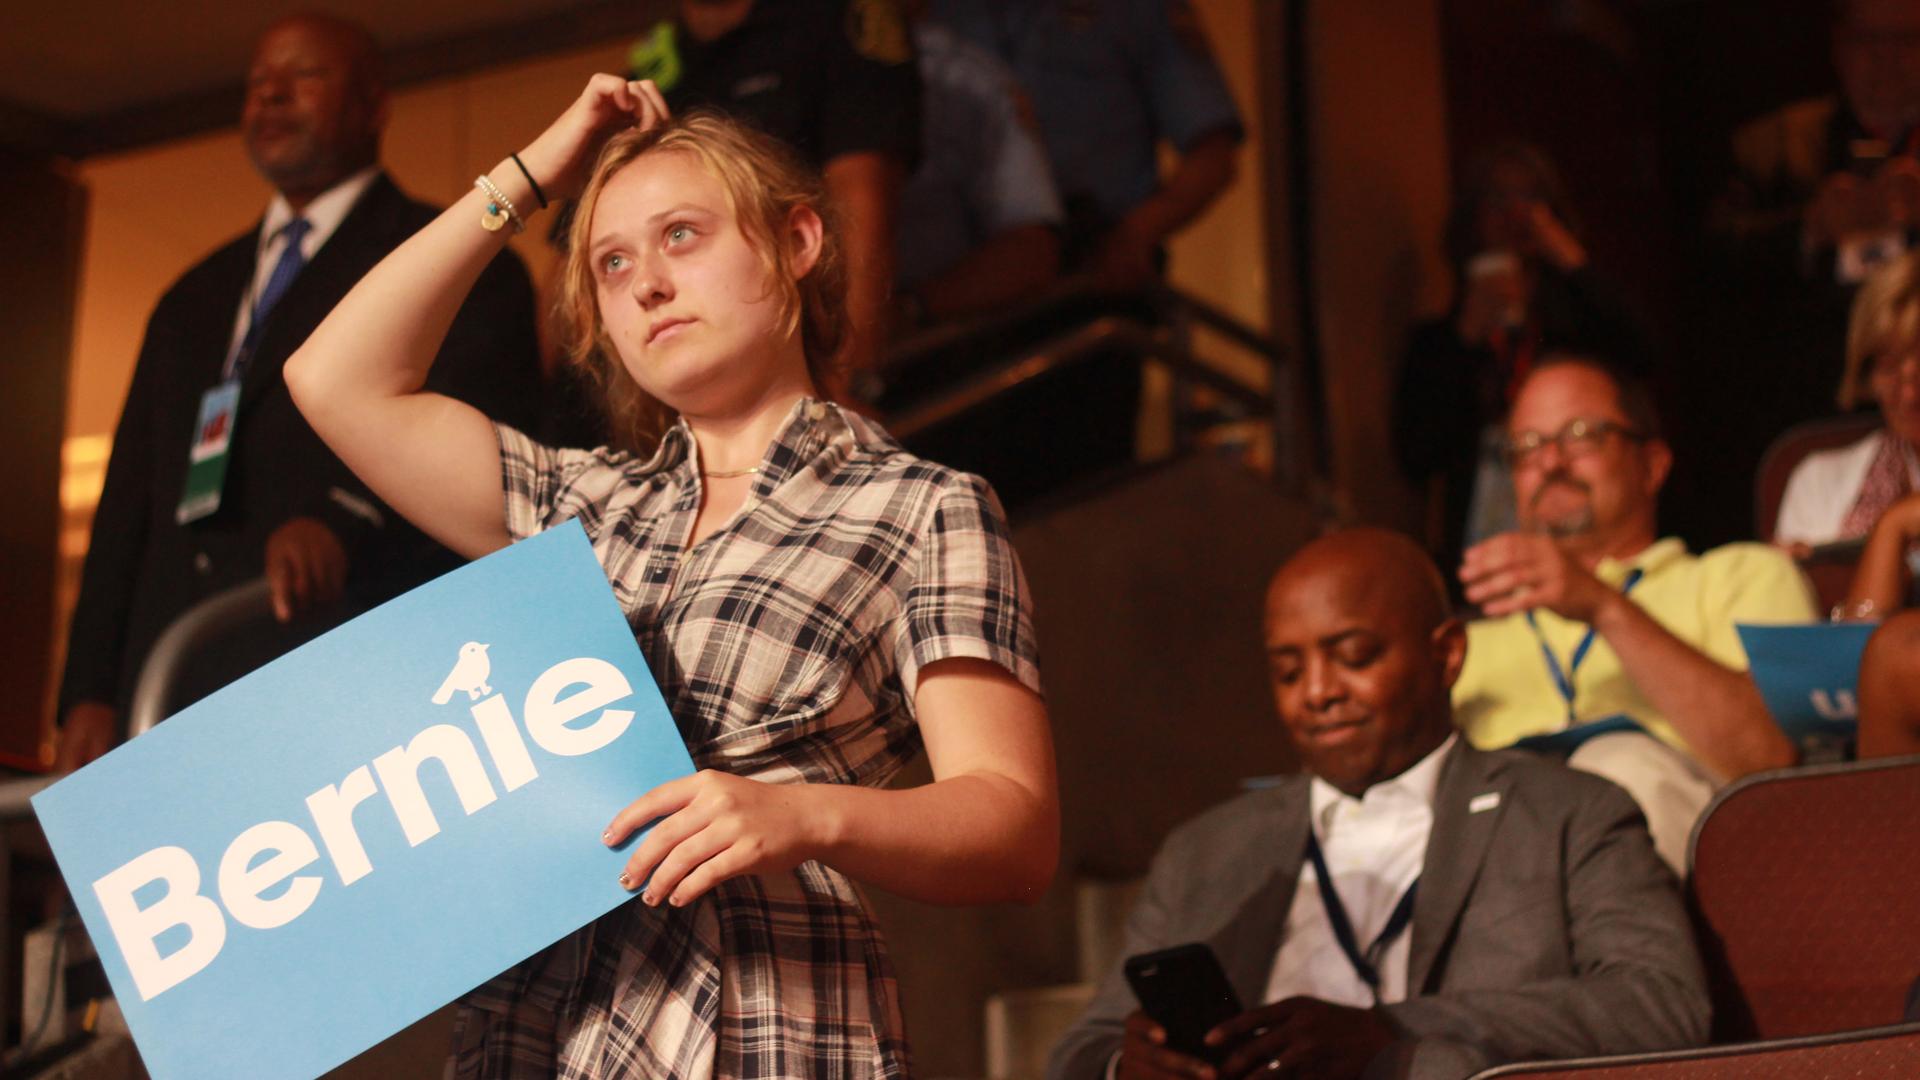 A woman holds a "Bernie!" sign at the Democratic National Convention